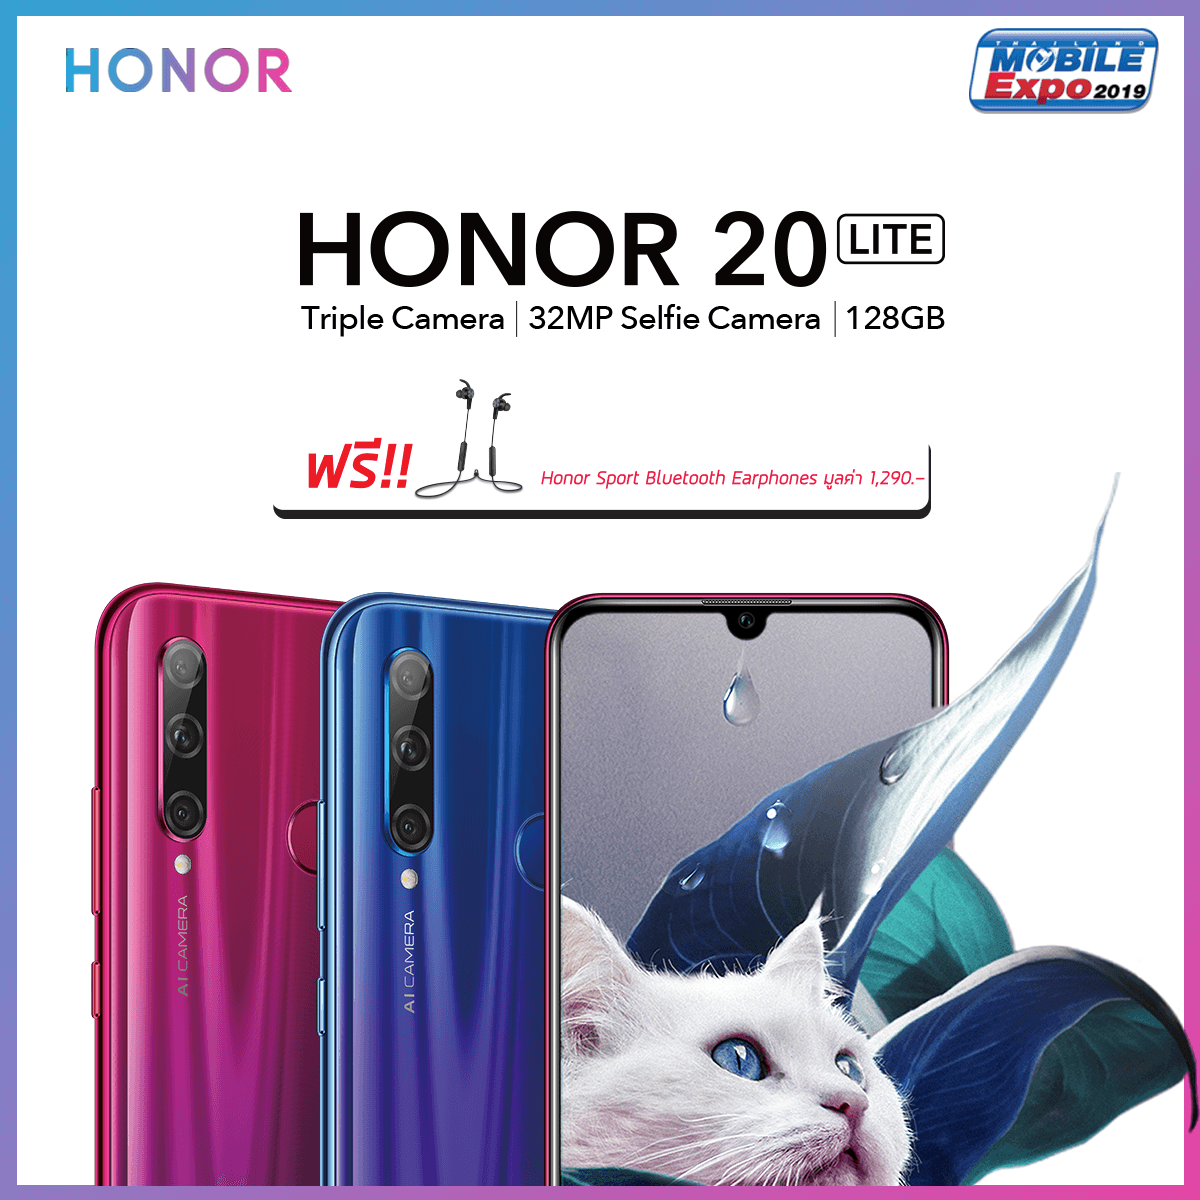 - HONOR TME Promotions 1 - ภาพที่ 1